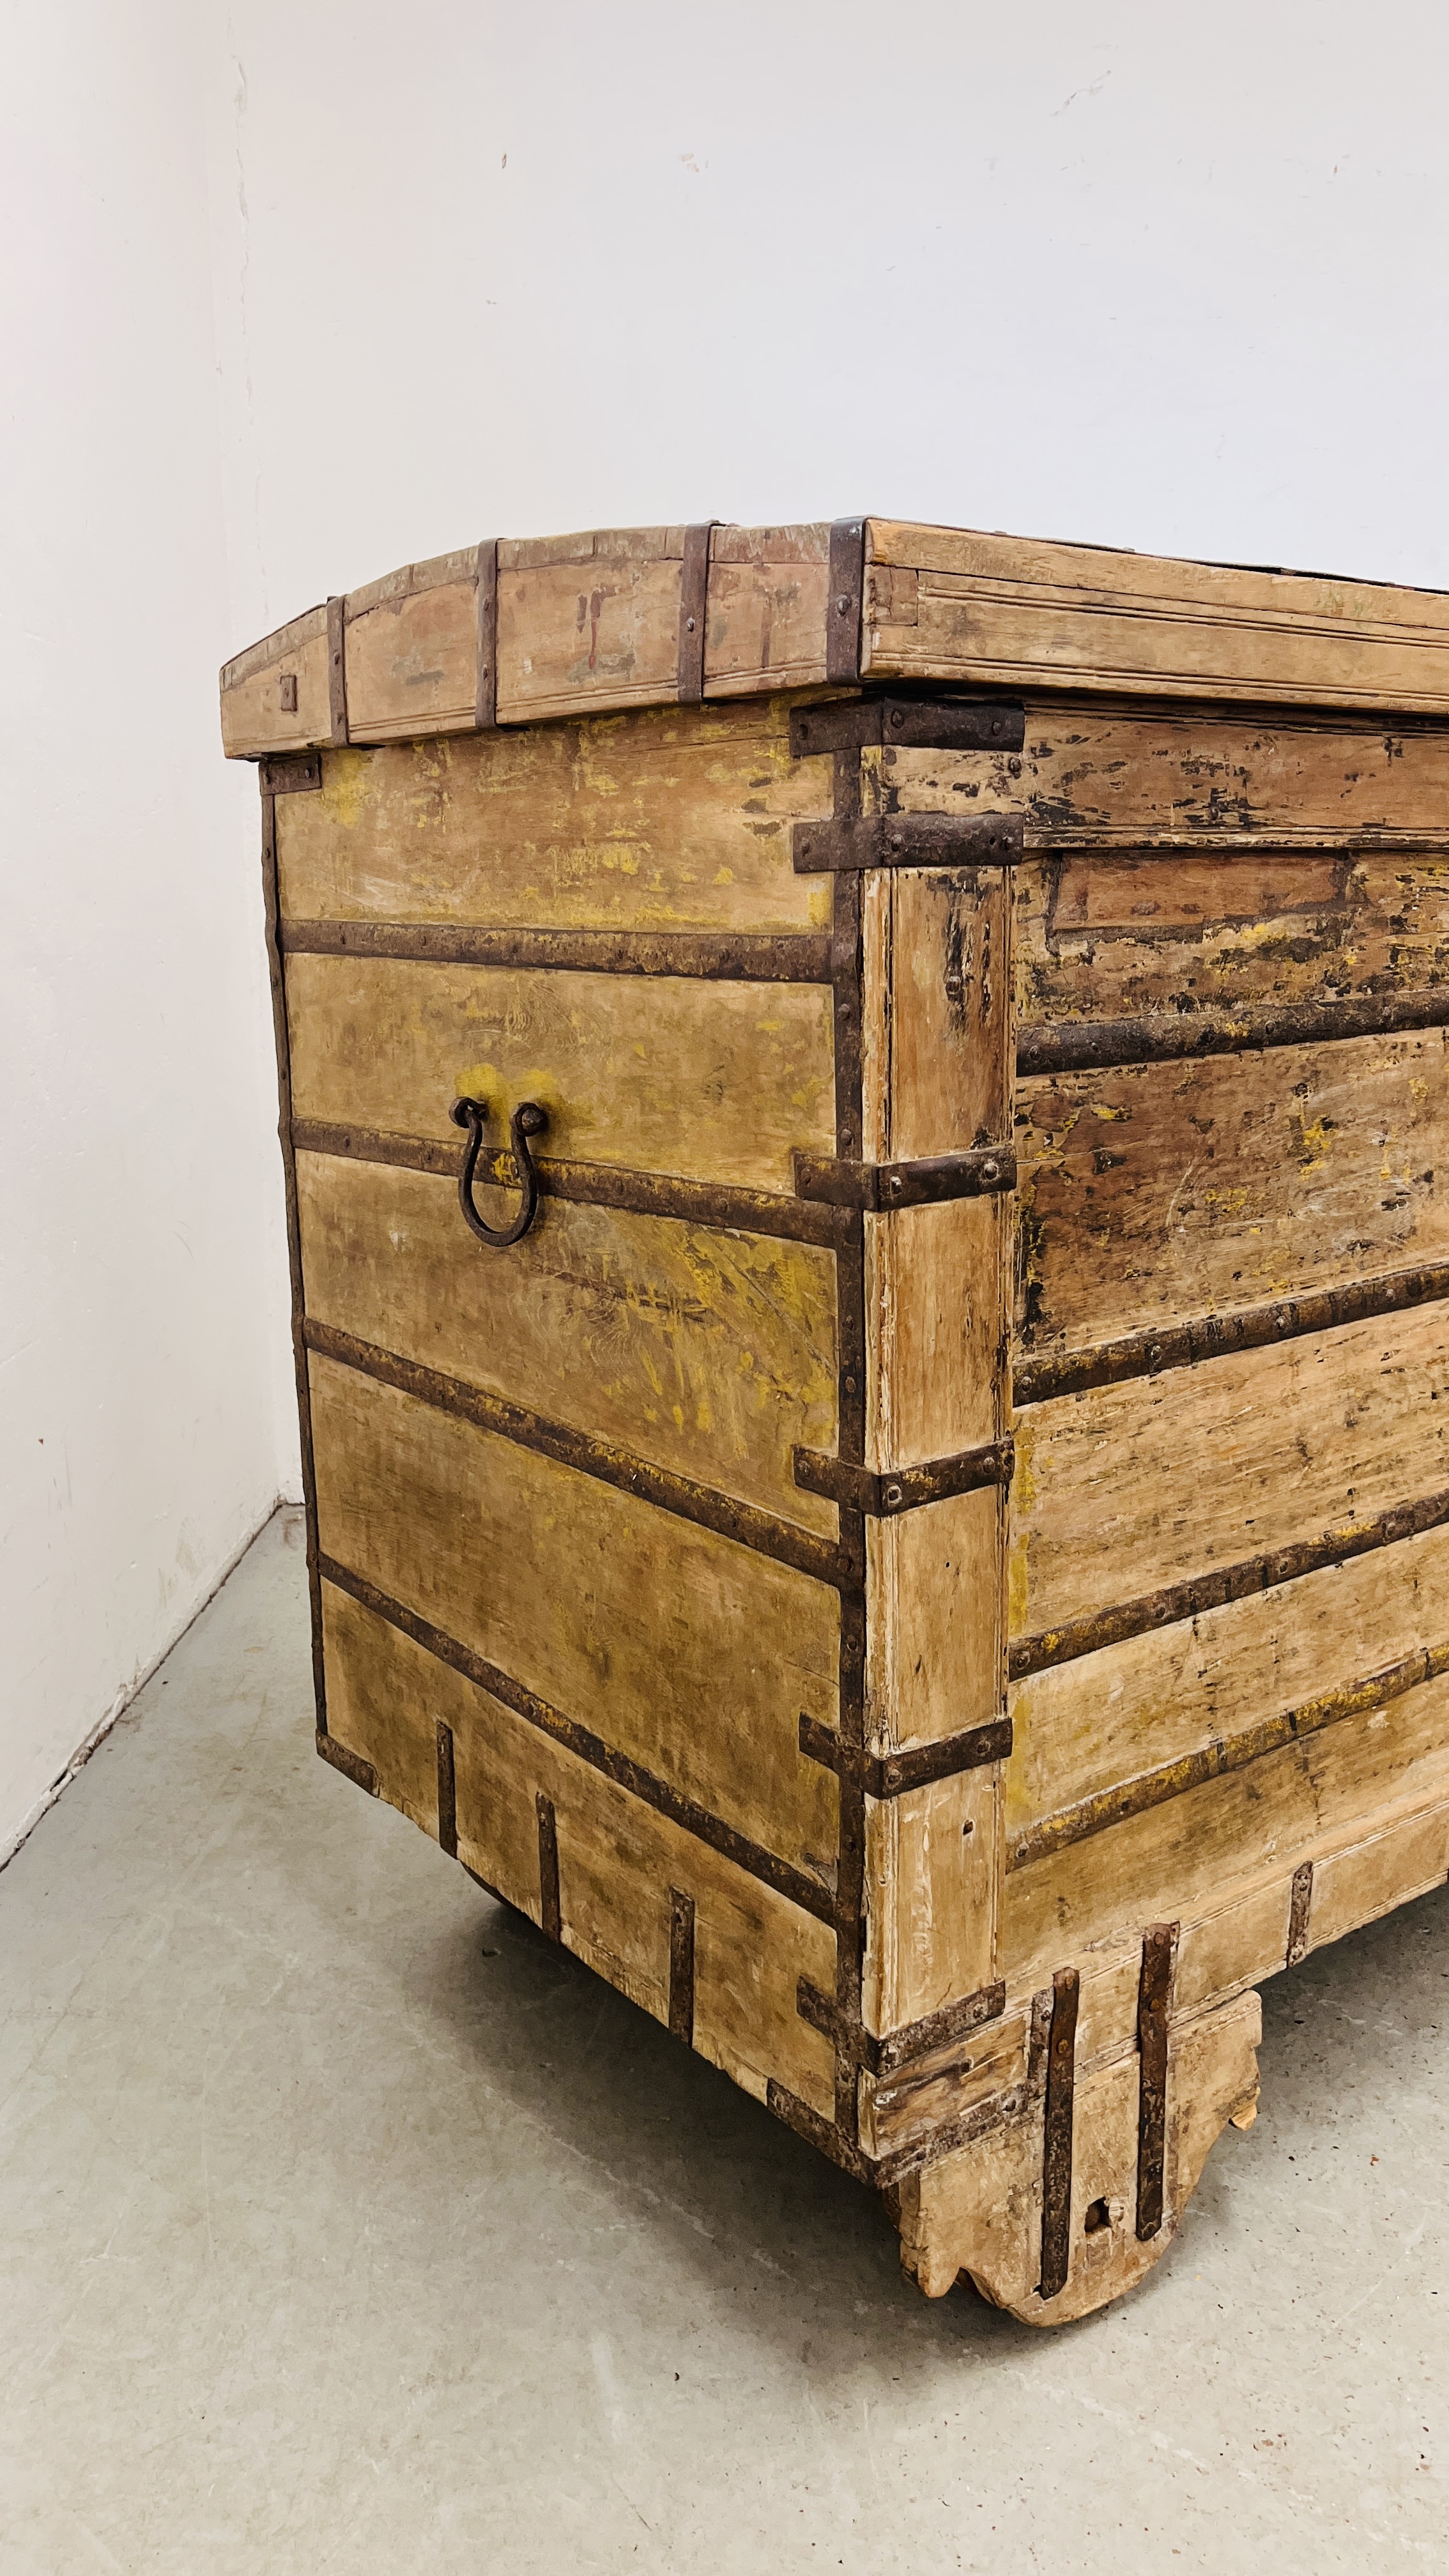 AN EXTREMELY LARGE RAJASTHANI 19th CENTURY DOWRY CHEST - 158CM W X 81CM D X 123CM H. - Image 4 of 30